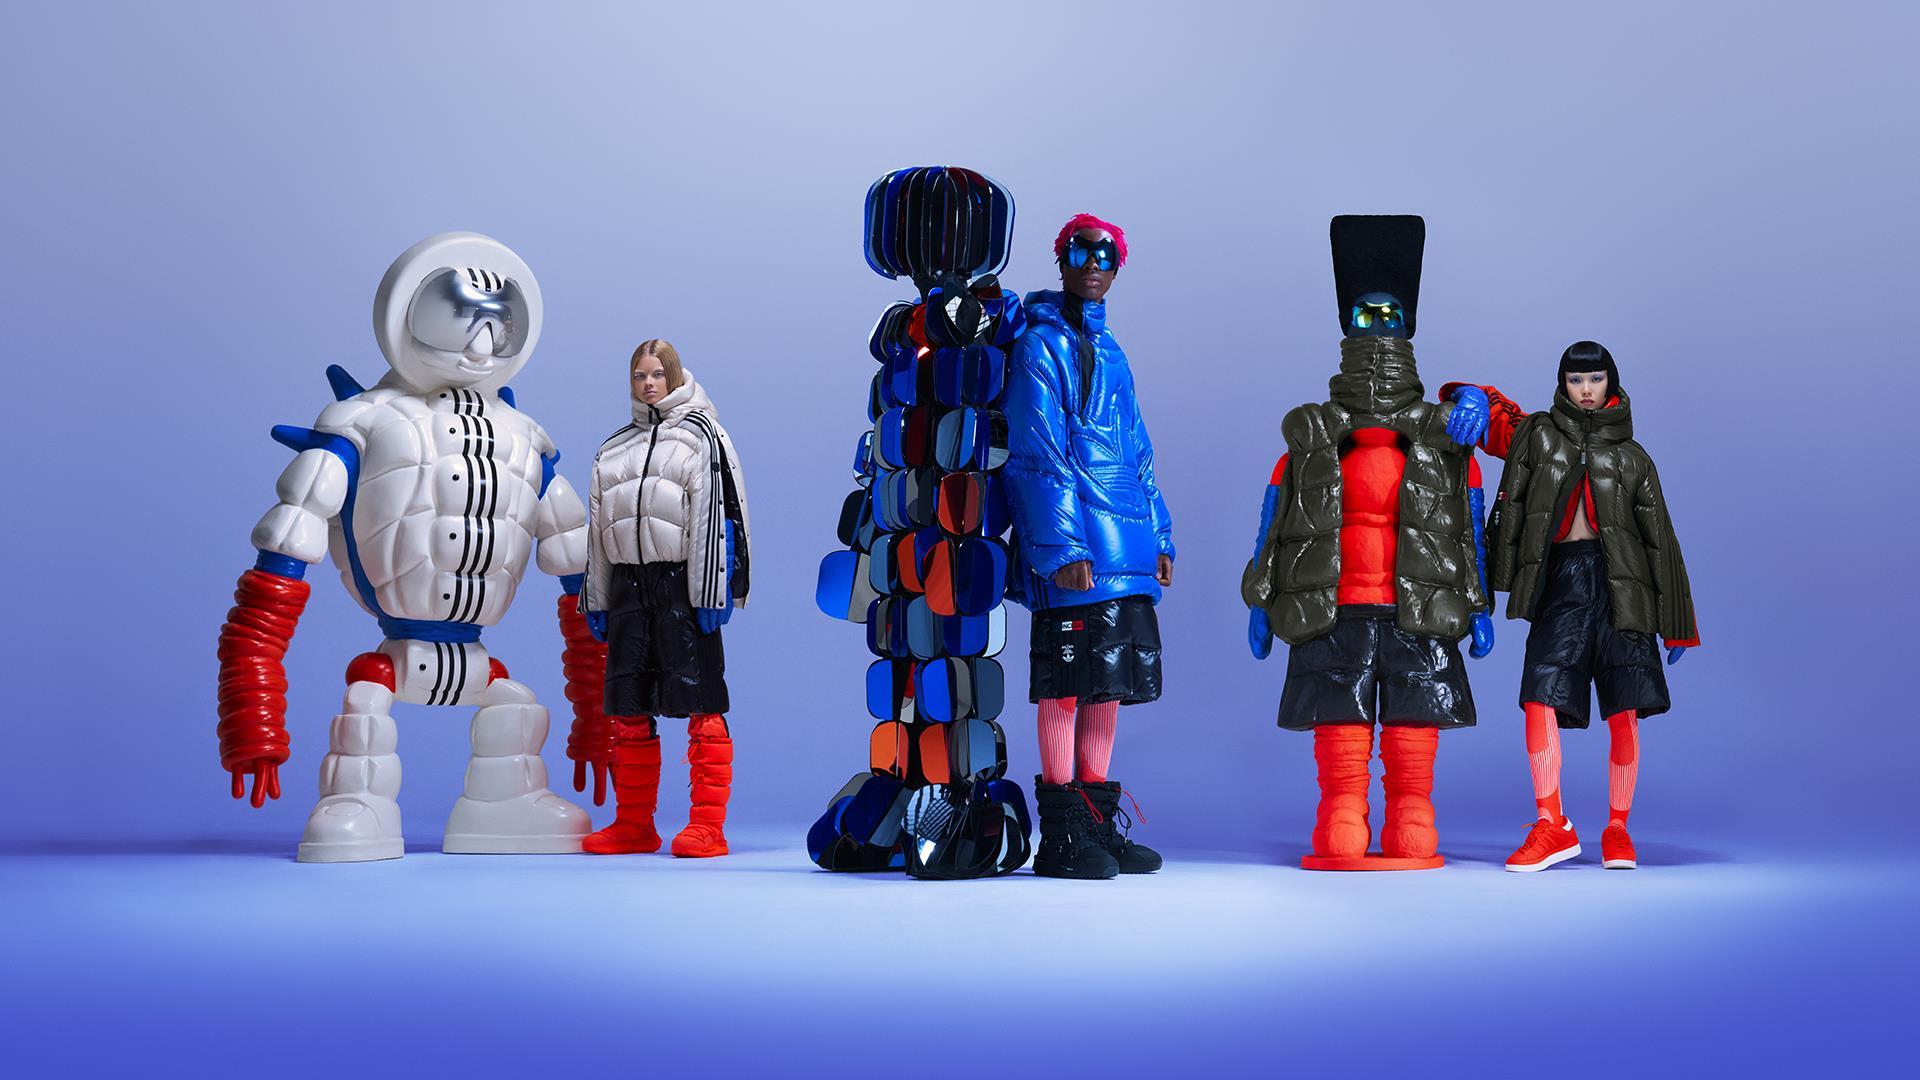 Moncler x adidas Originals have created a cool collaboration